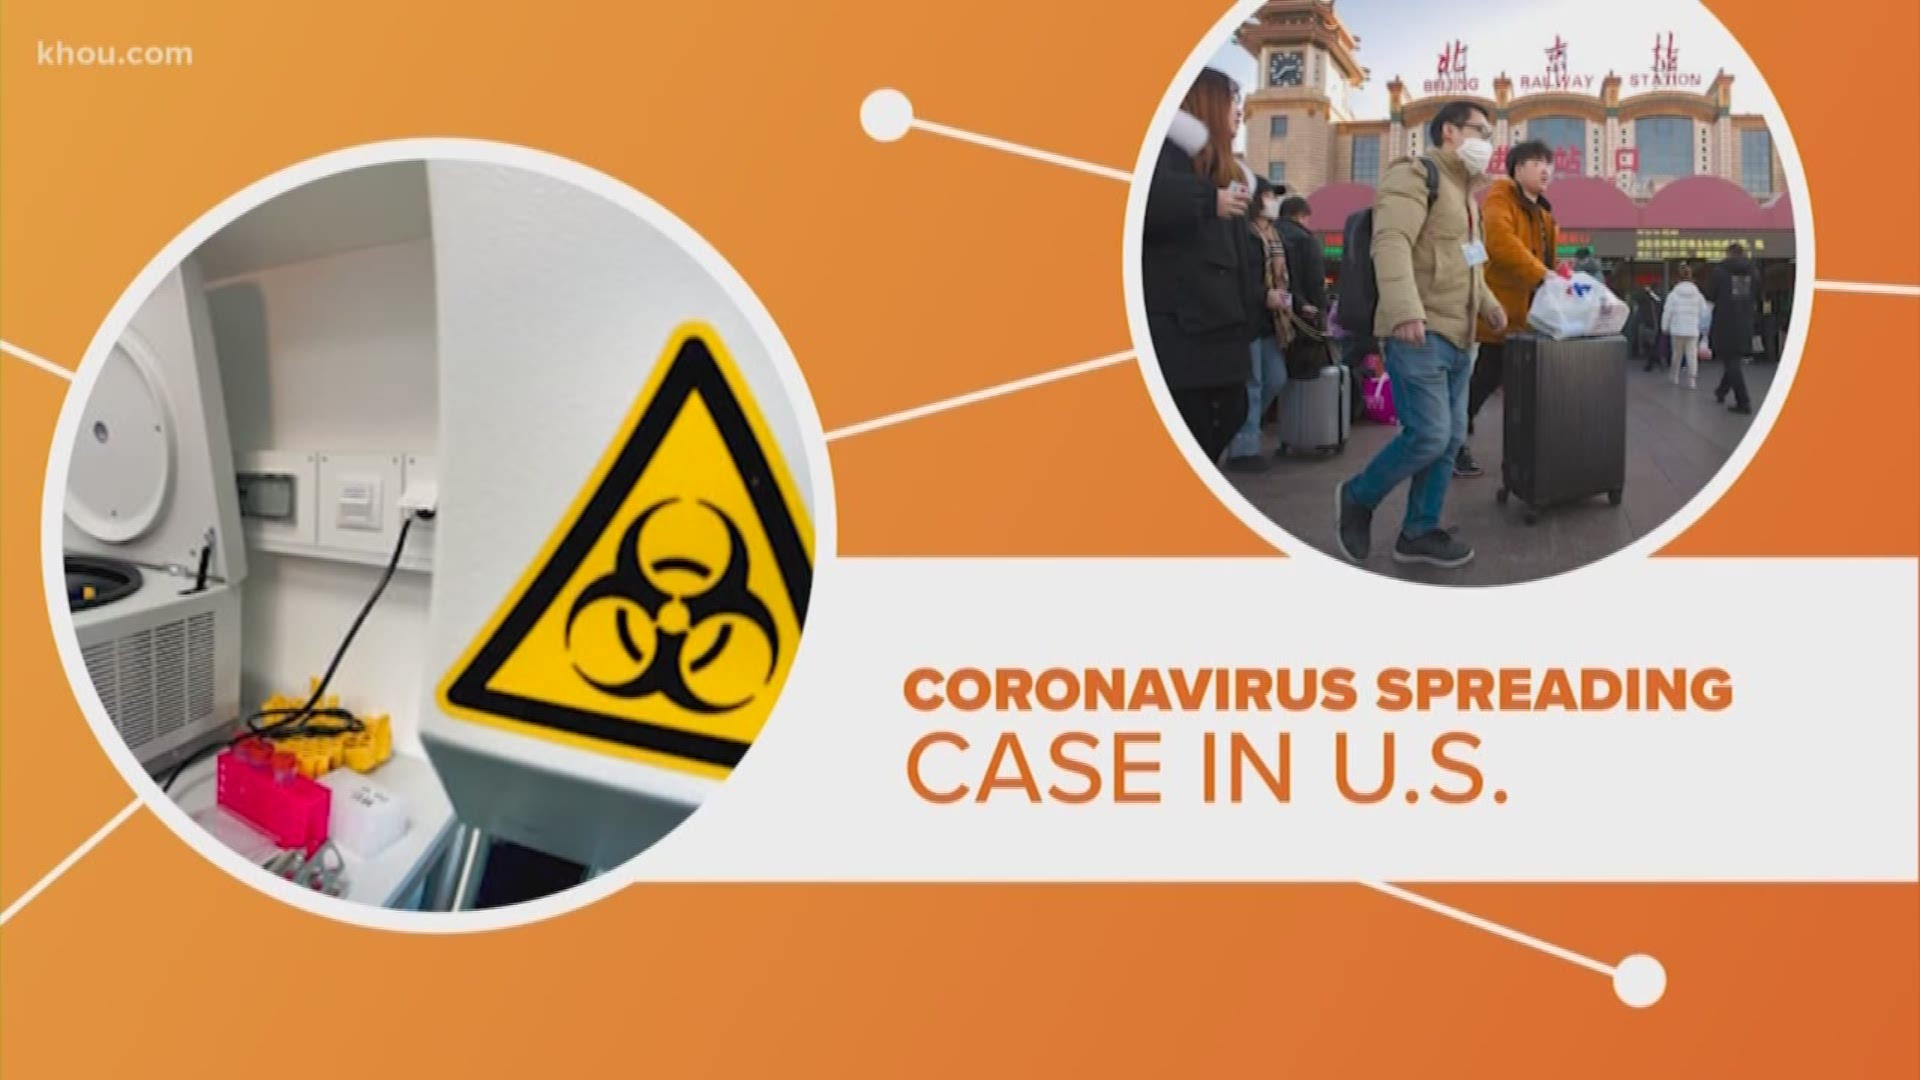 We've told you about fears surrounding the coronavirus which are growing worldwide this morning. So what do you need to know about this illness?